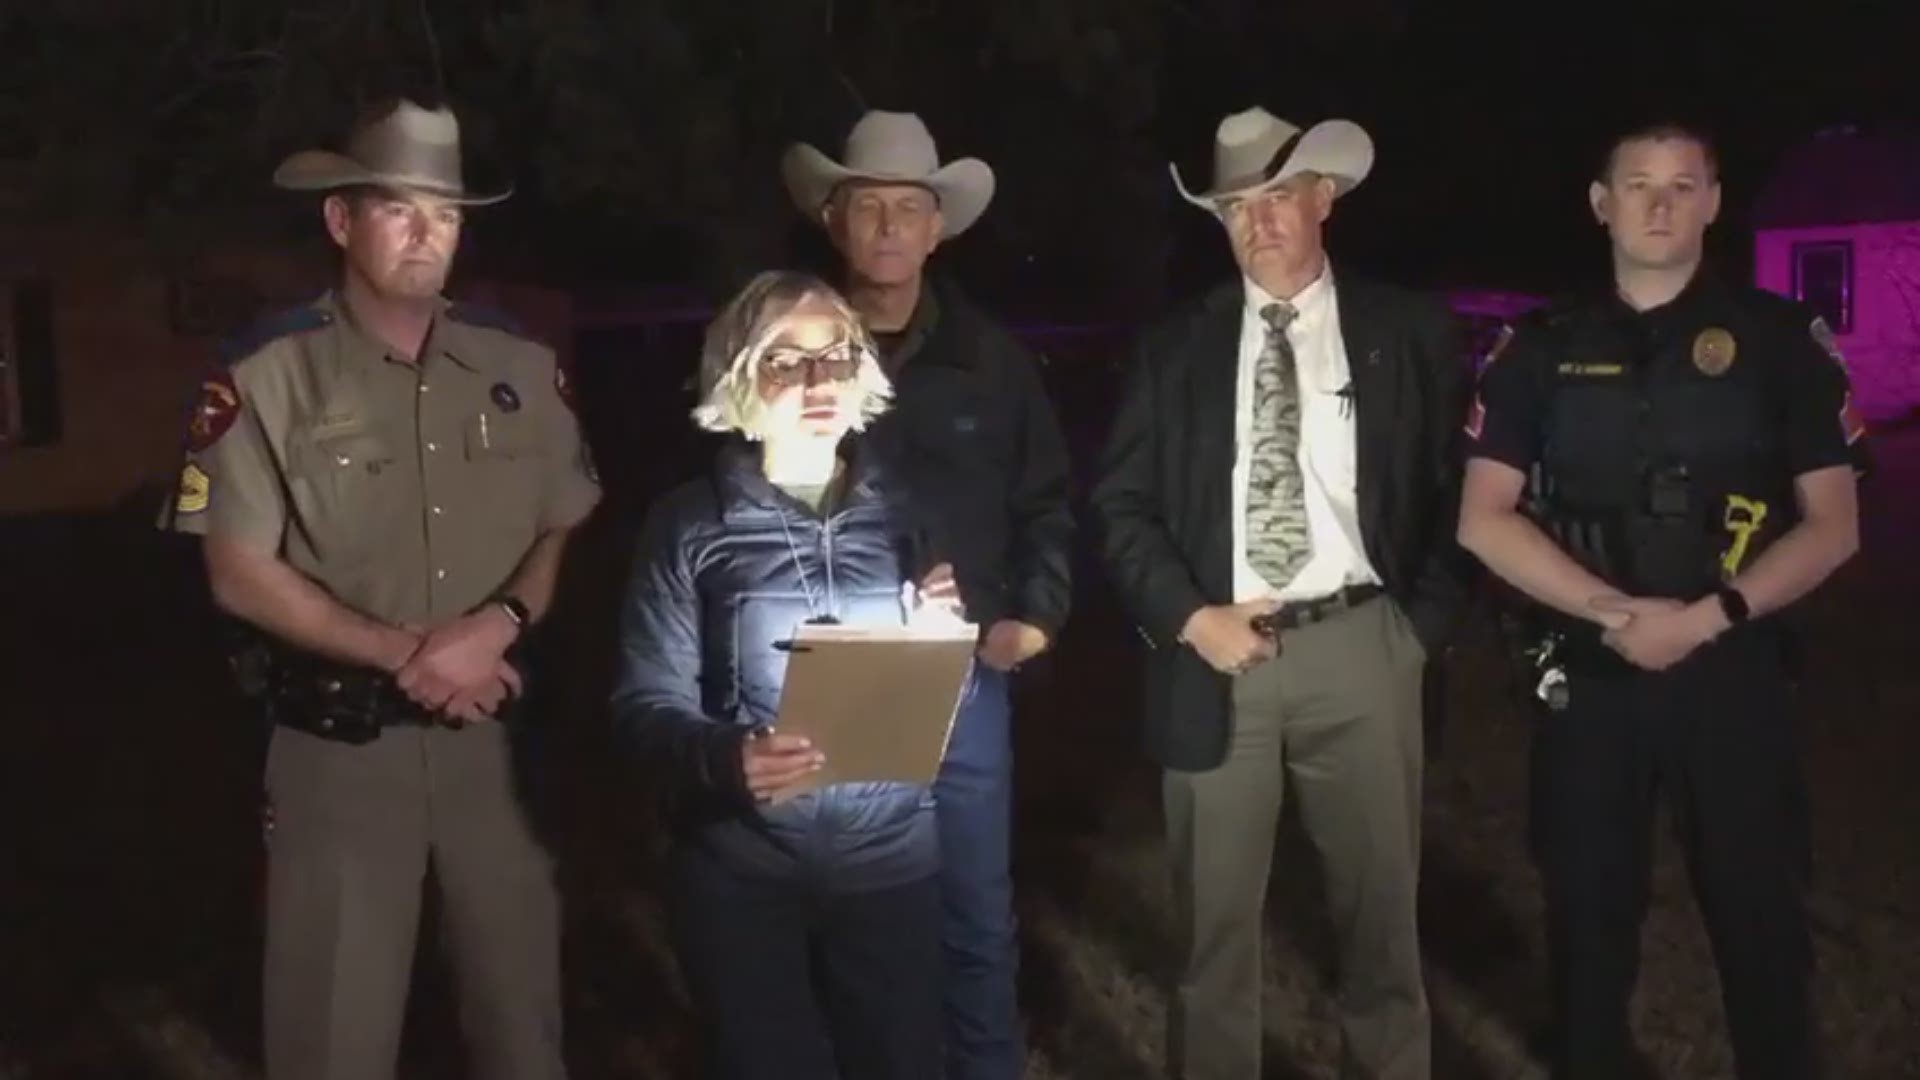 Members of the San Angelo Police Department, the Tom Green County Sheriff's Office and Texas DPS briefed the media on officer-involved shooting.